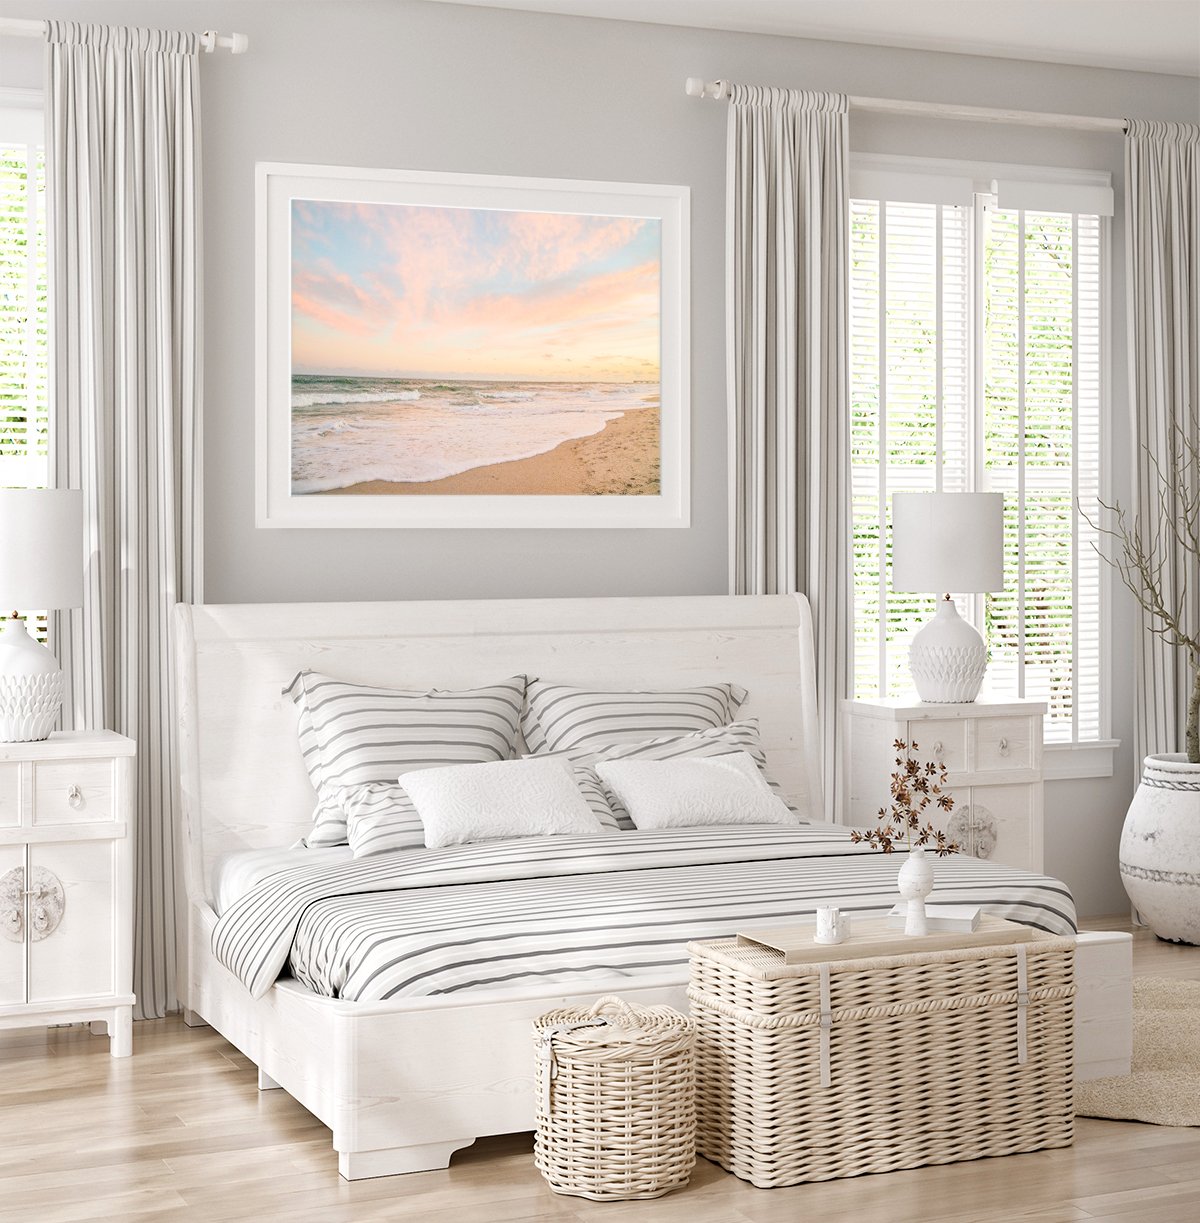 Coastal White Bedroom Decor featuring pastel warm beach photograph by Wright and Roam